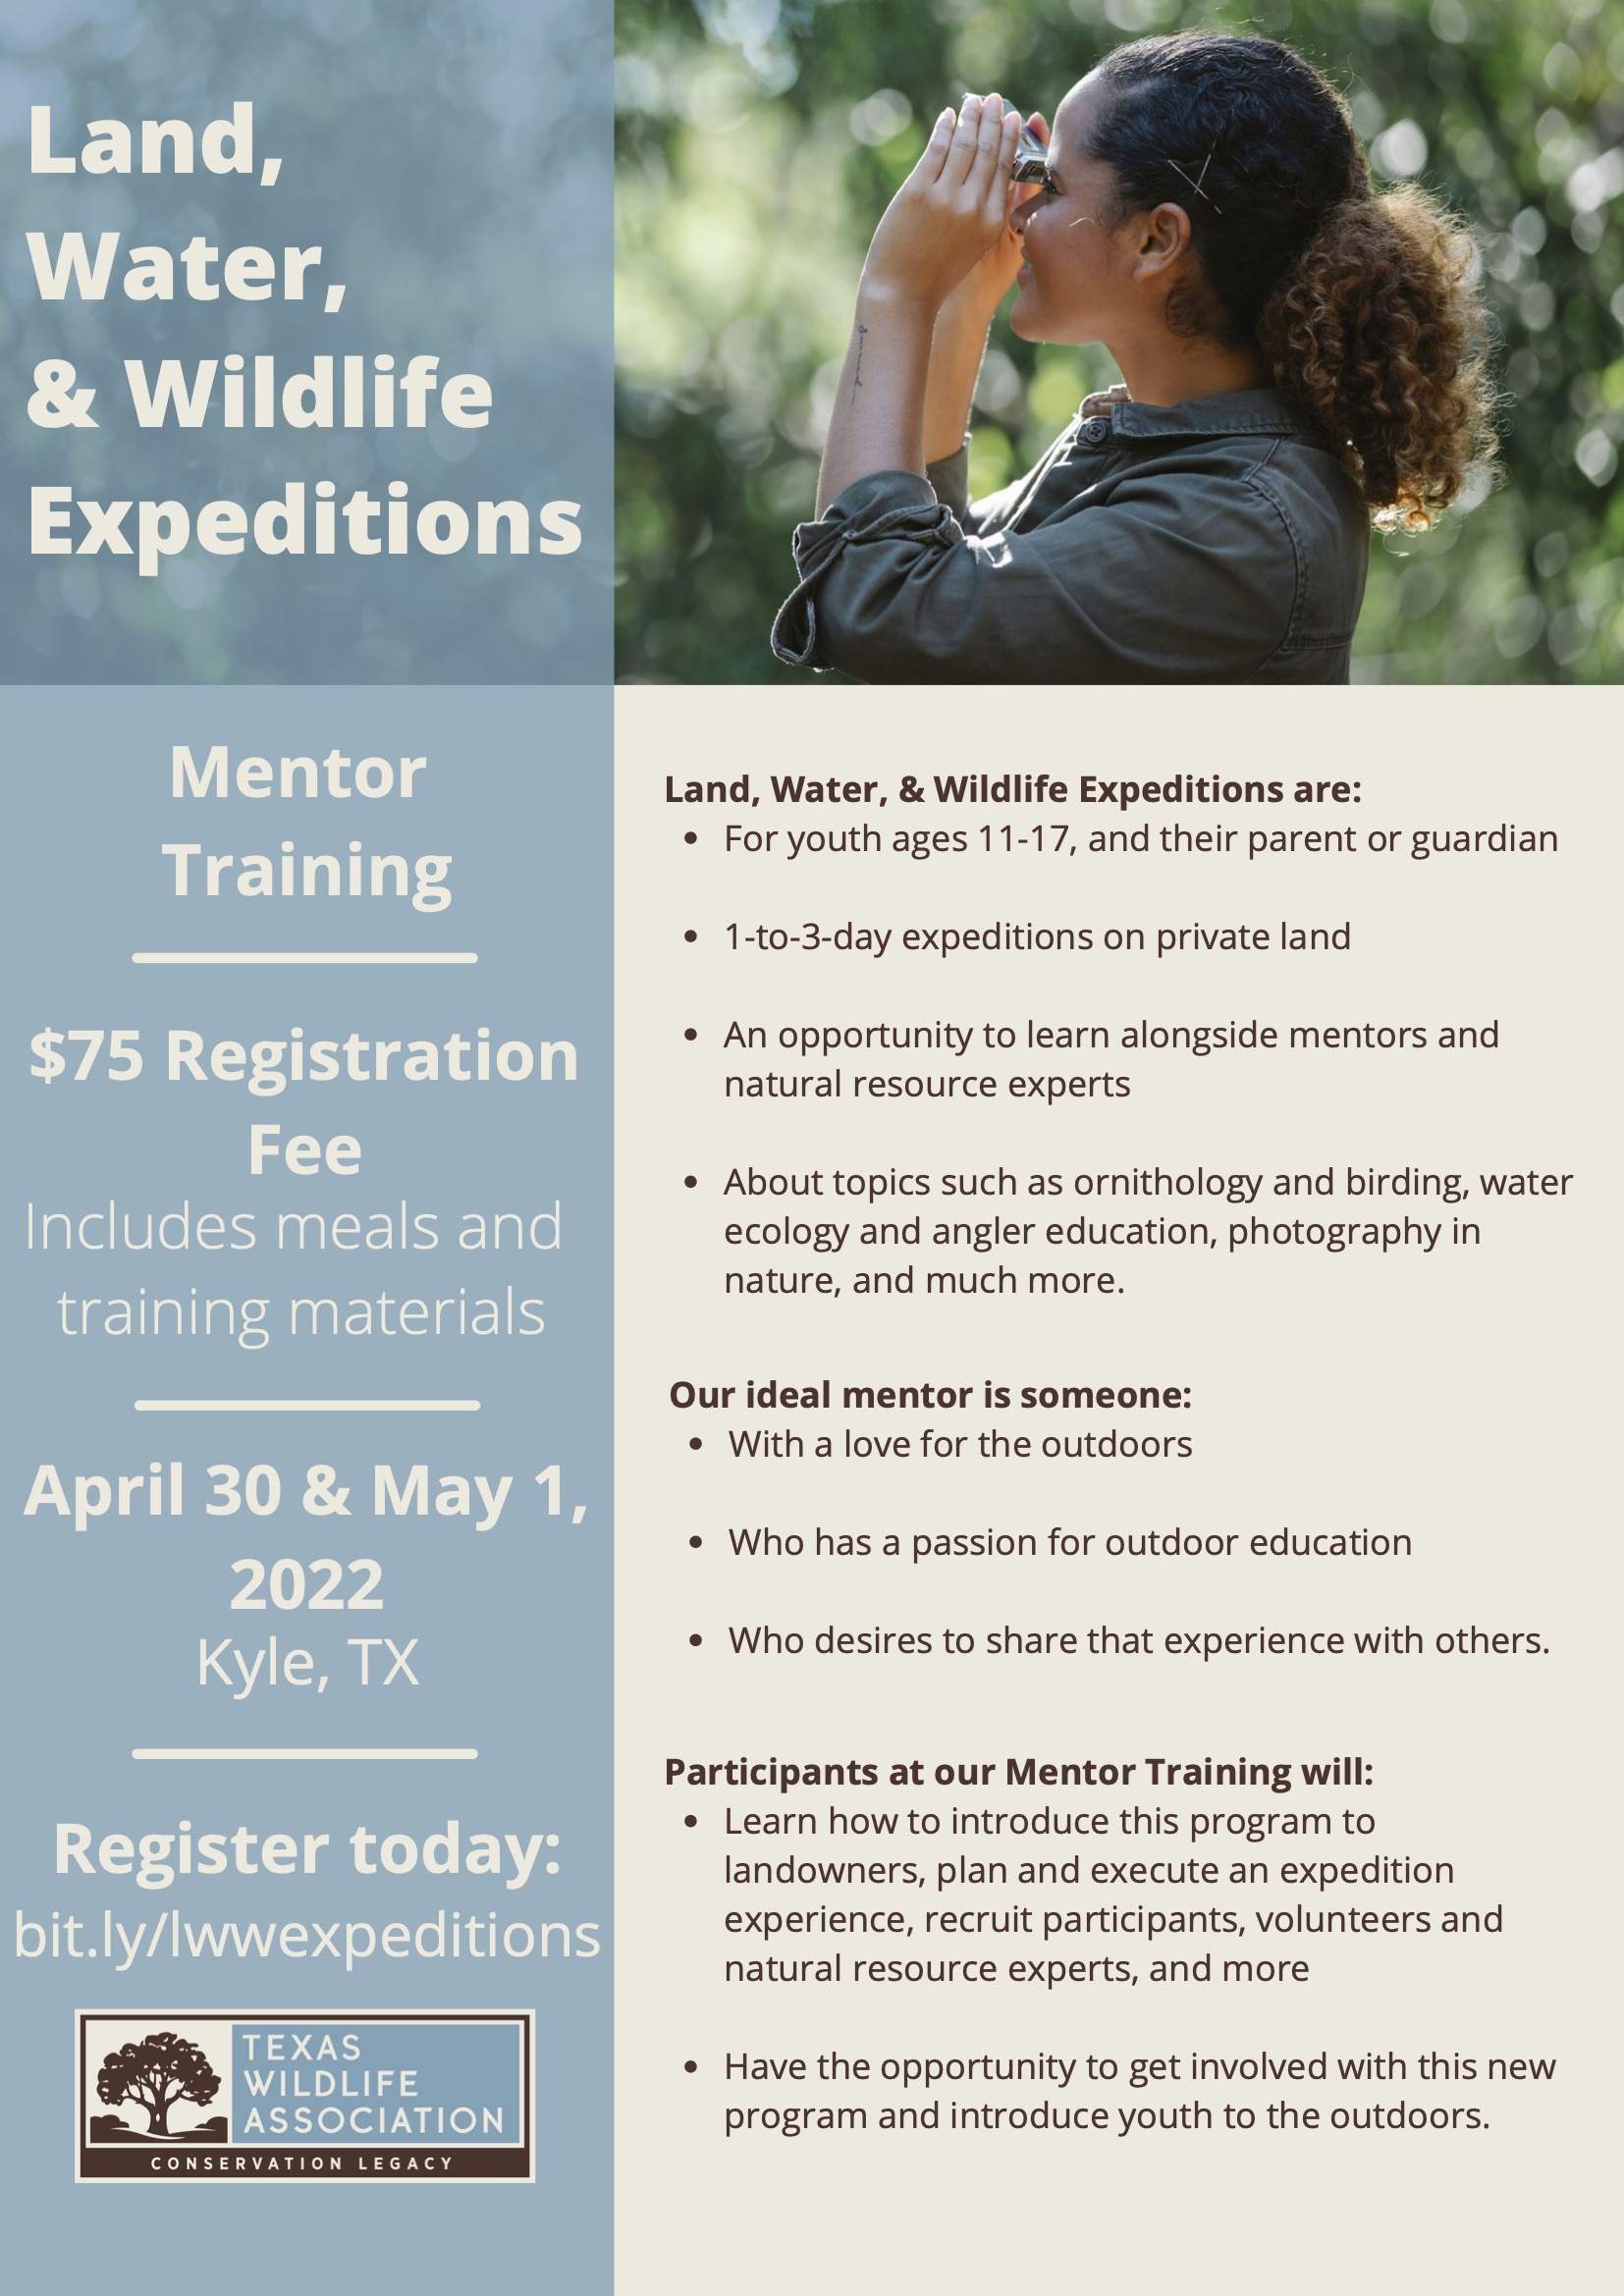 Flyer for Texas Wildlife Association Land, Water, and Wildlife Expeditions Mentor Training